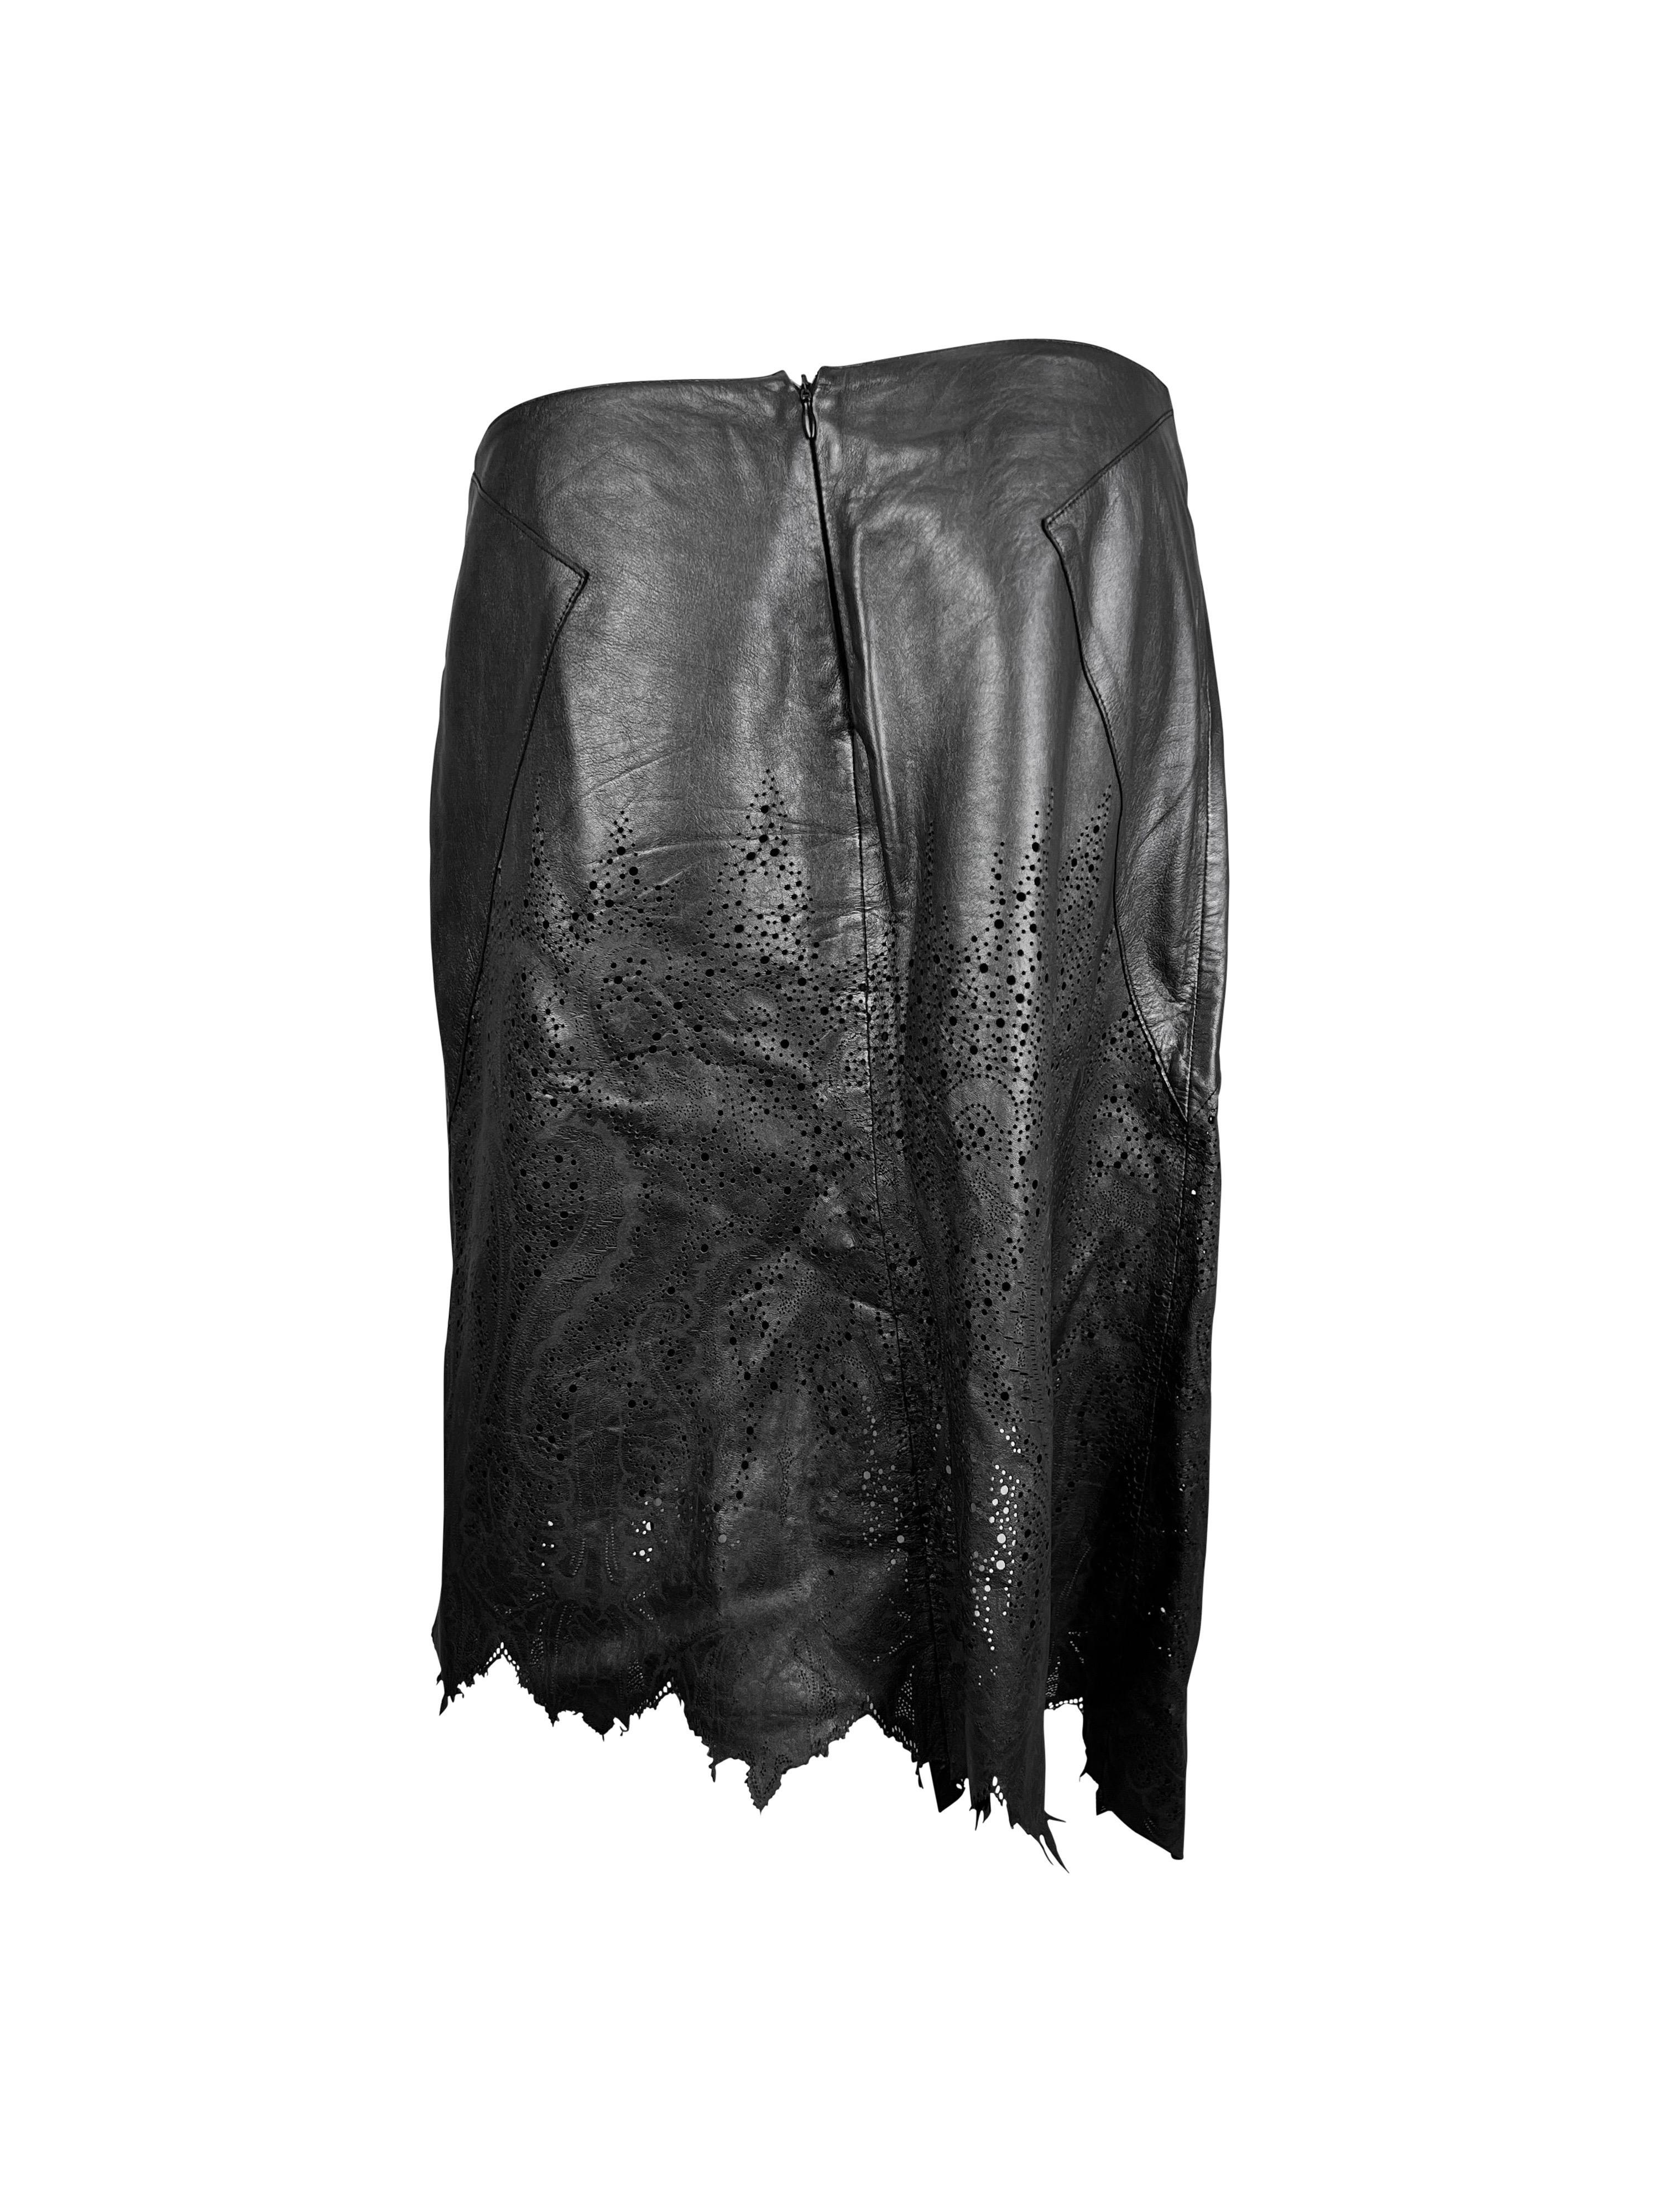 Fall 2001 Roberto Cavalli Leather Skirt In Excellent Condition For Sale In Prague, CZ